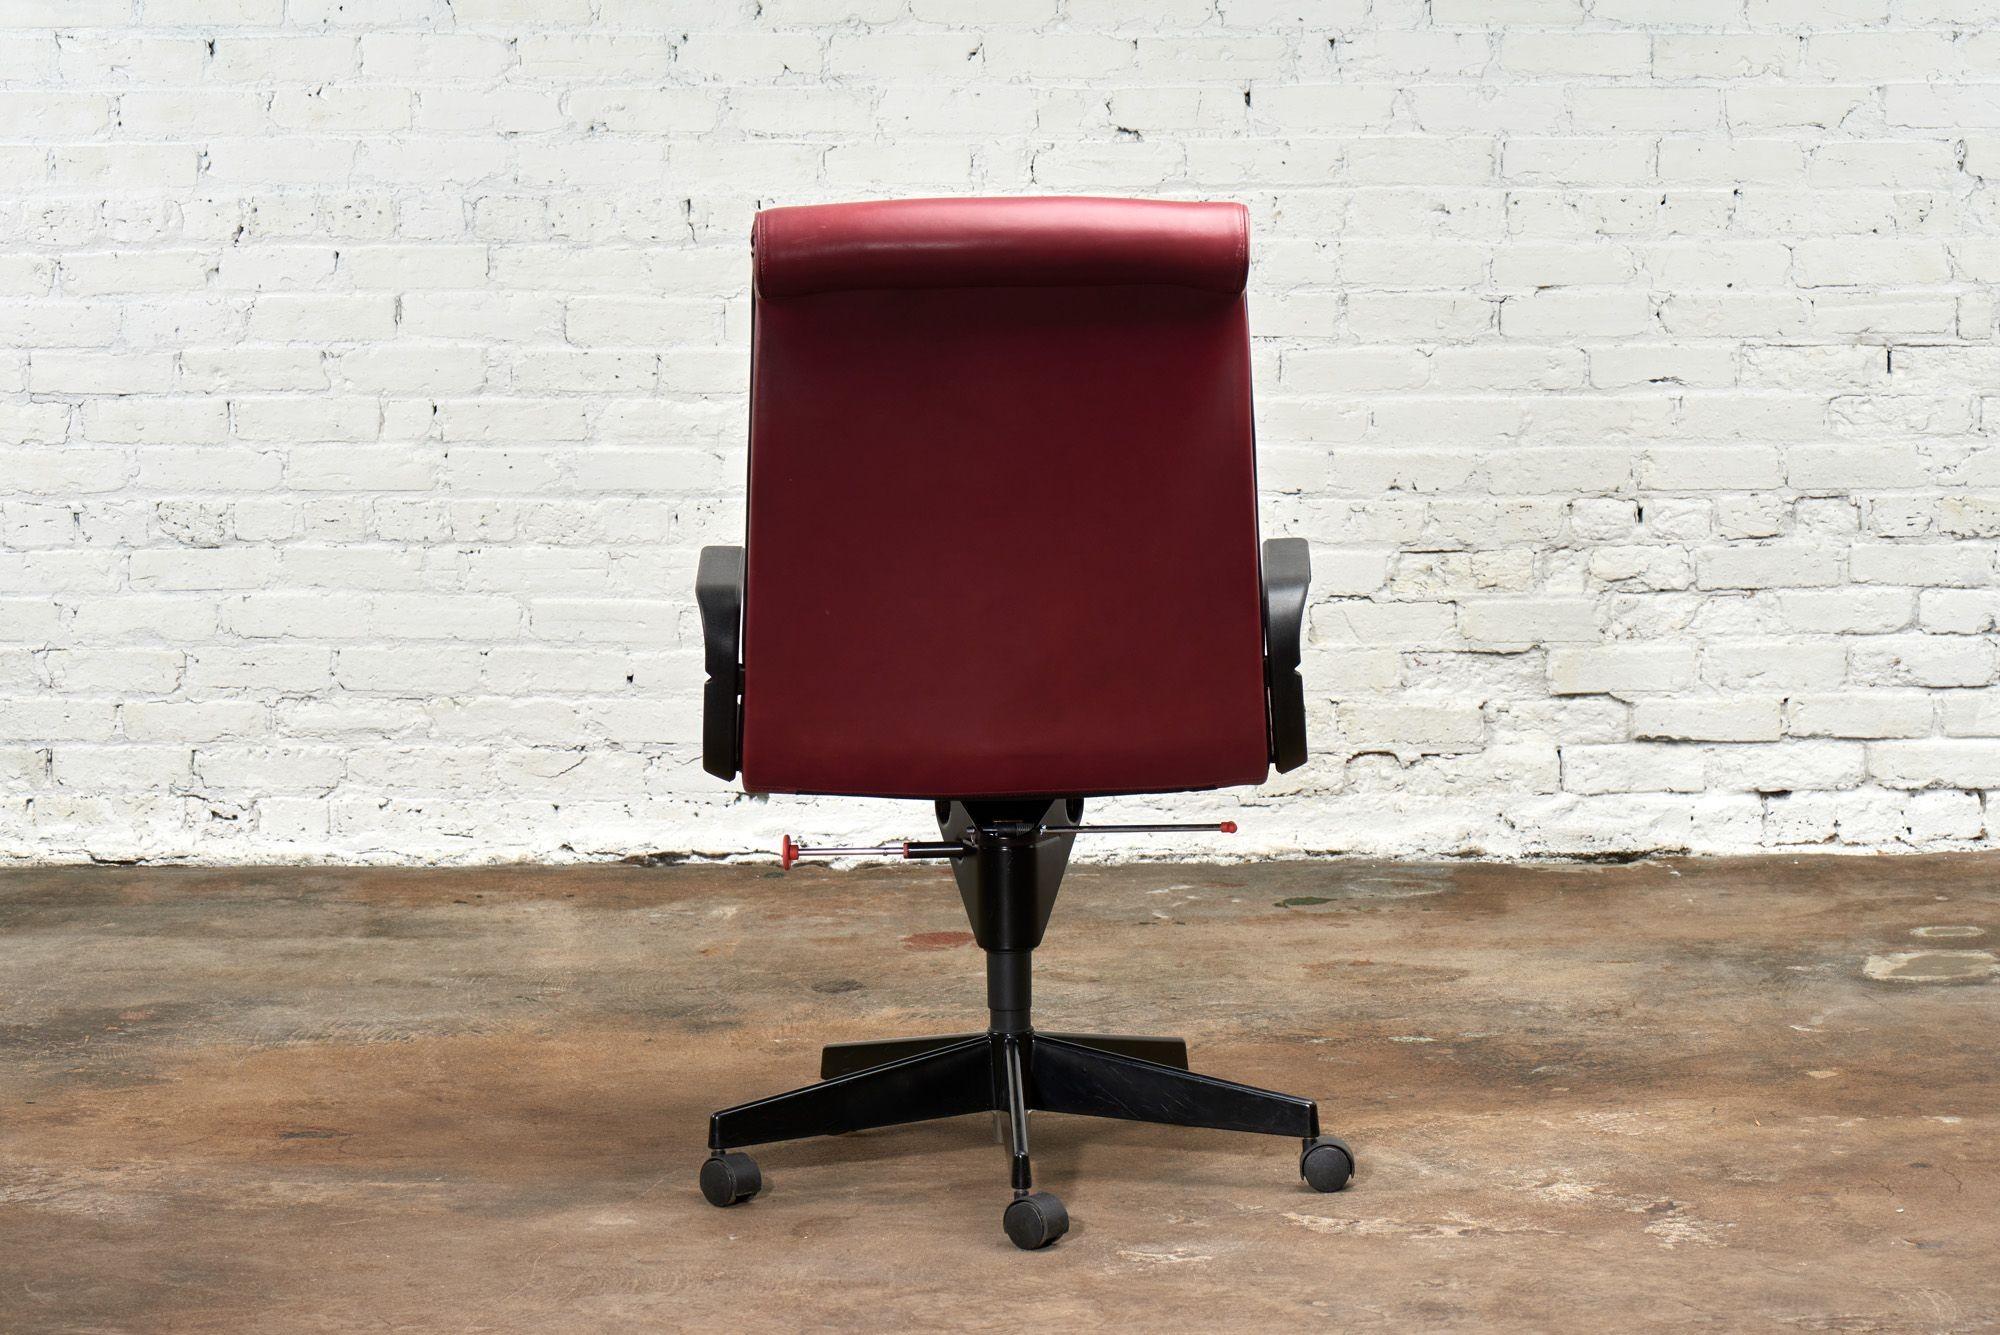 Red Leather Desk Chair by Richard Sapper for Knoll Inc/Knoll Intl, France 1992 In Good Condition For Sale In Chicago, IL